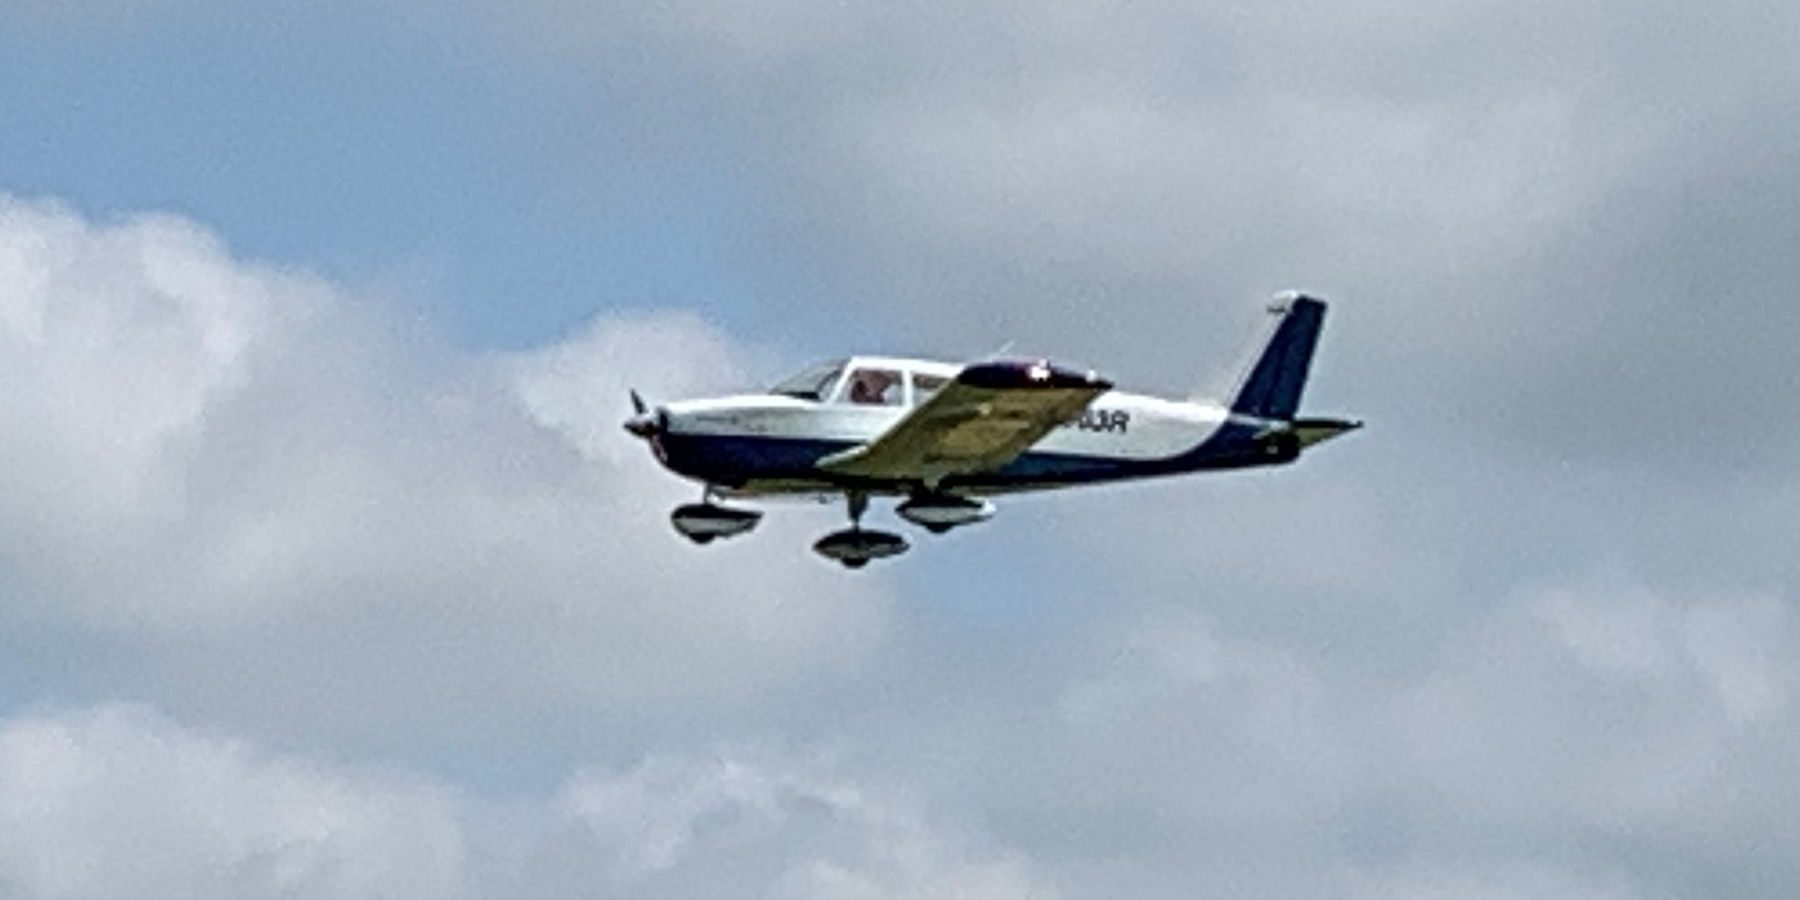 Mark Radcliff’s Piper Cherokee on a flyby.